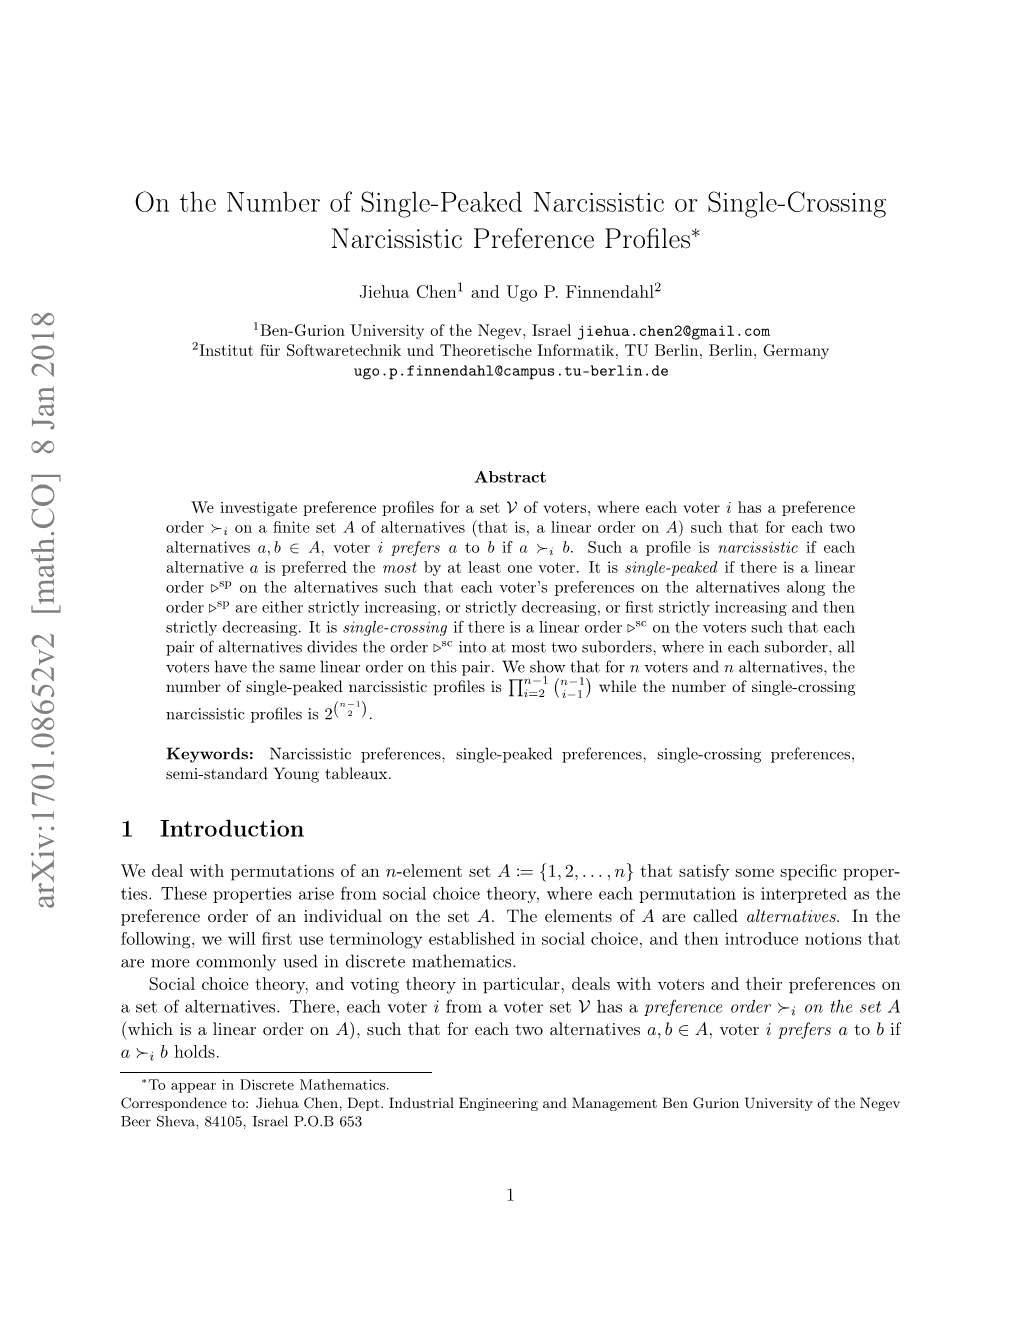 On the Number of Single-Peaked Narcissistic Or Single-Crossing